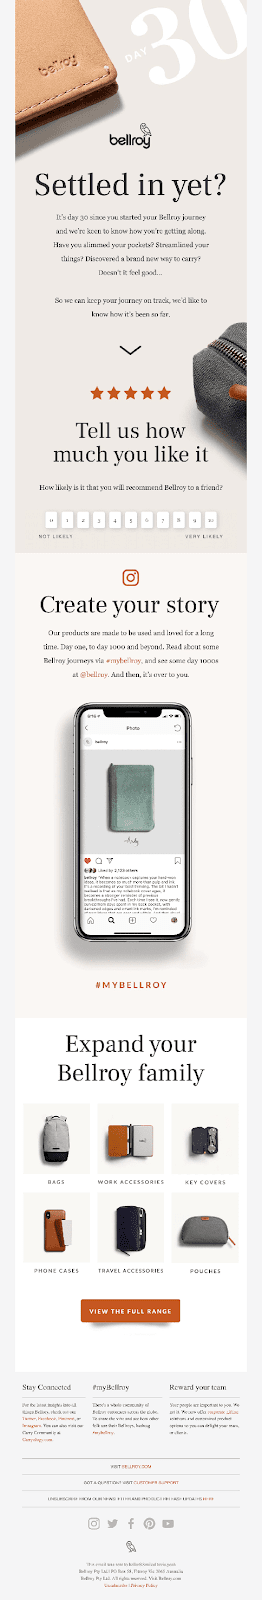 Bellroy email example